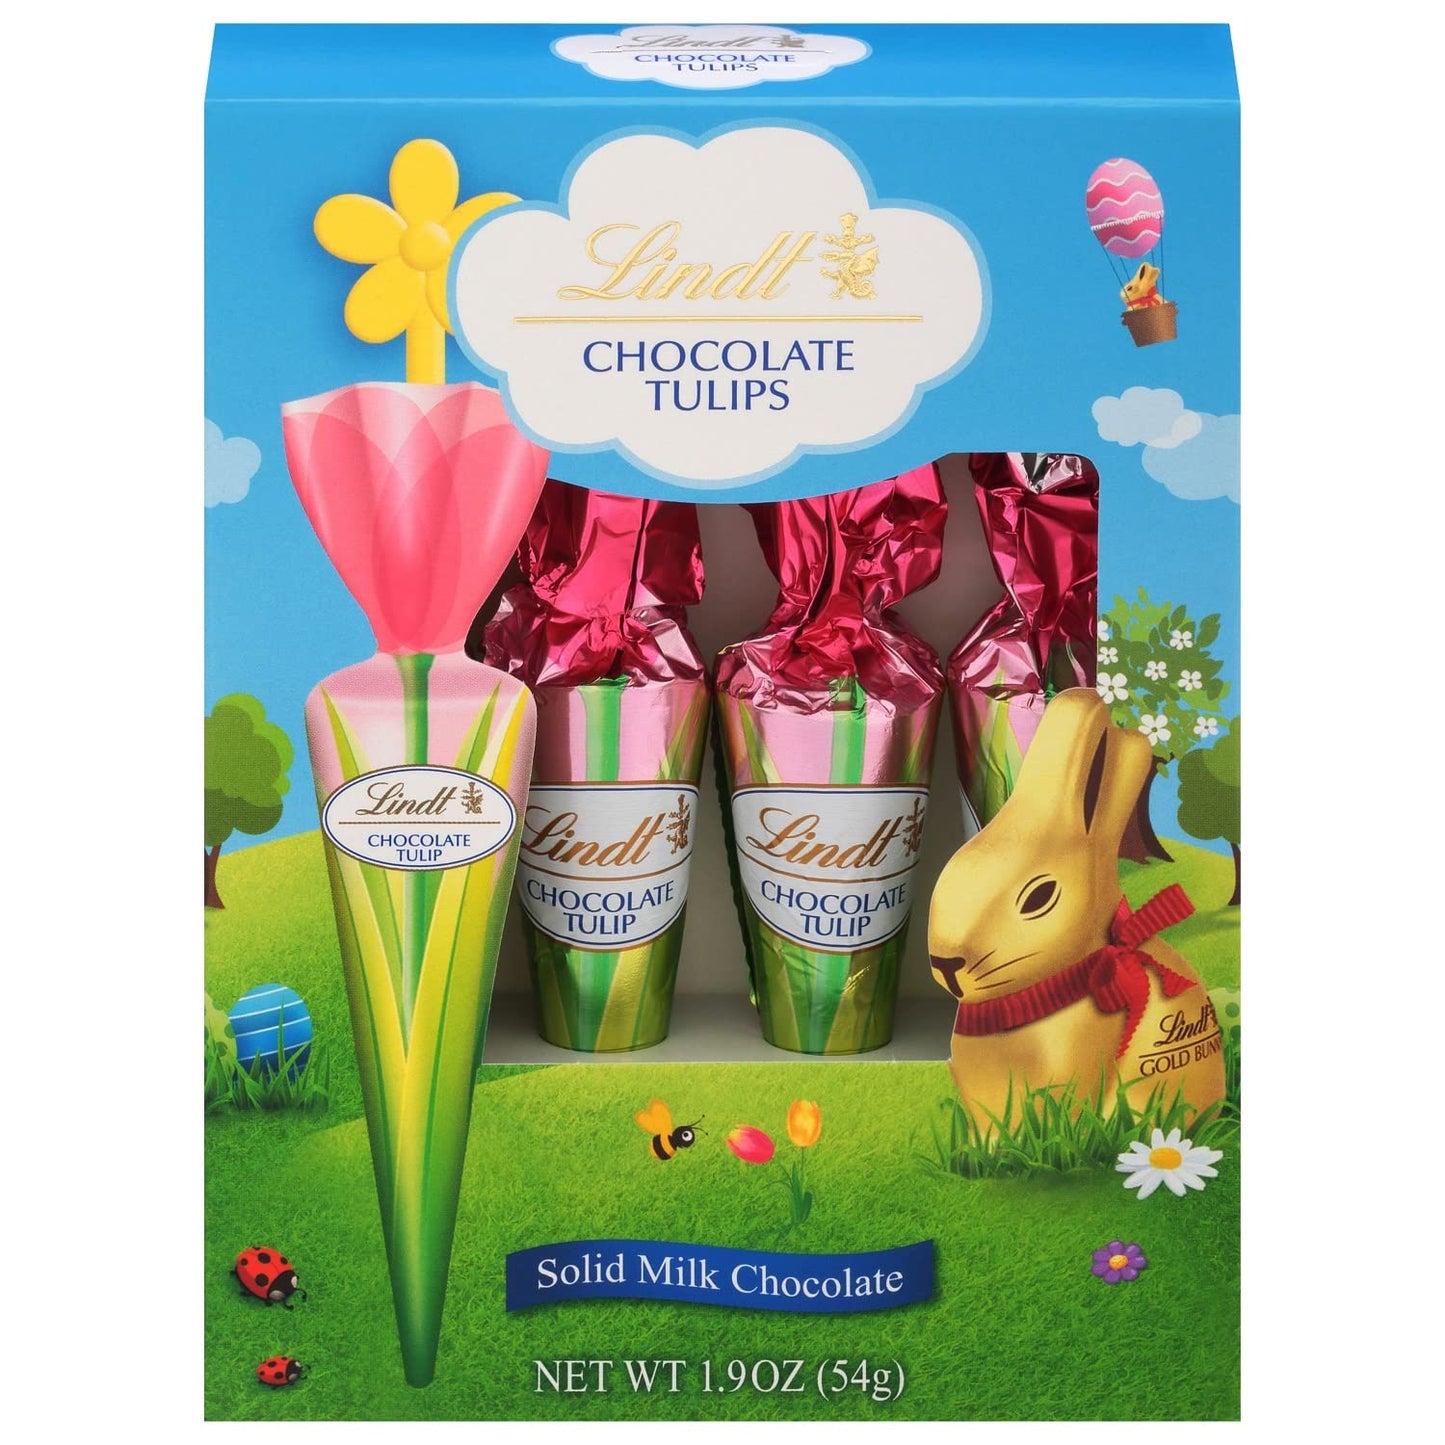 Lindt Chocolate Tulips, Easter Tulip-Shaped Solid Milk Chocolate on a Stick, 4 Pack